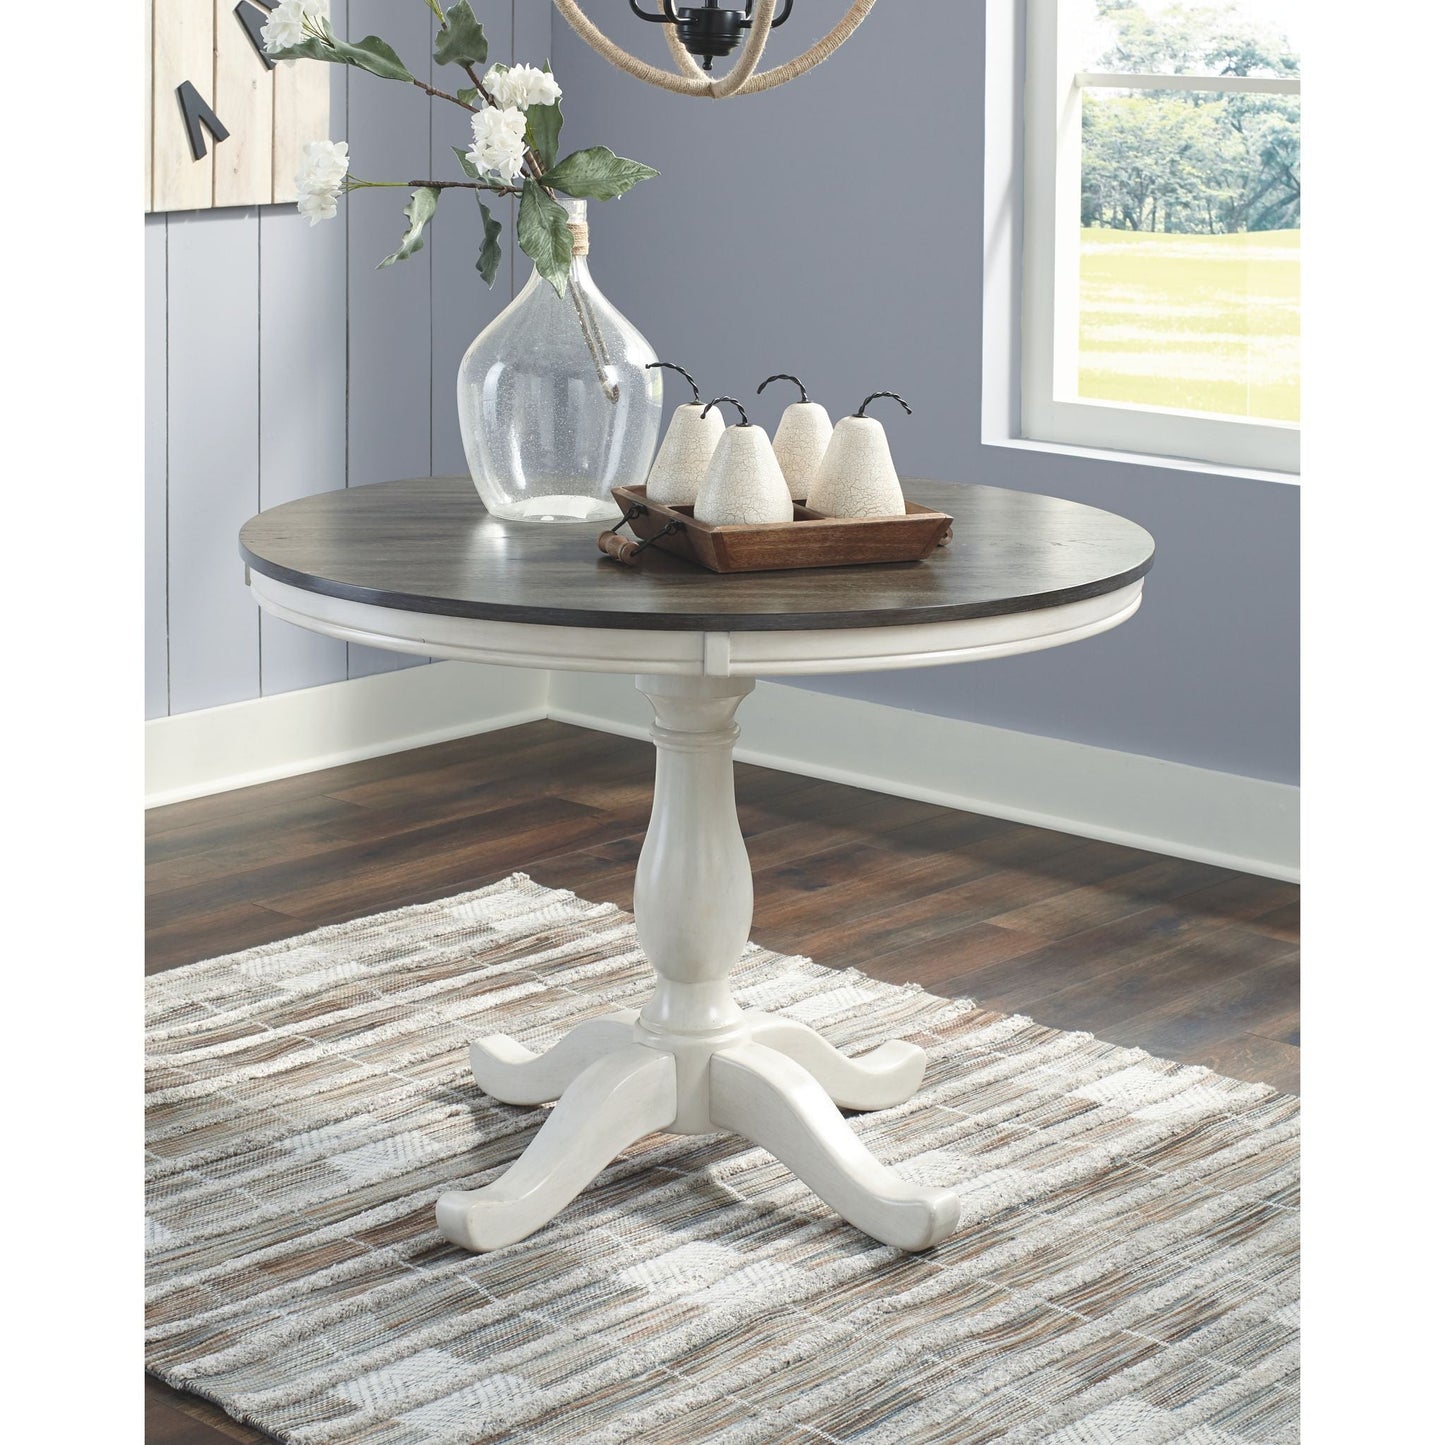 Nelling Round Table - White - (D287D2)